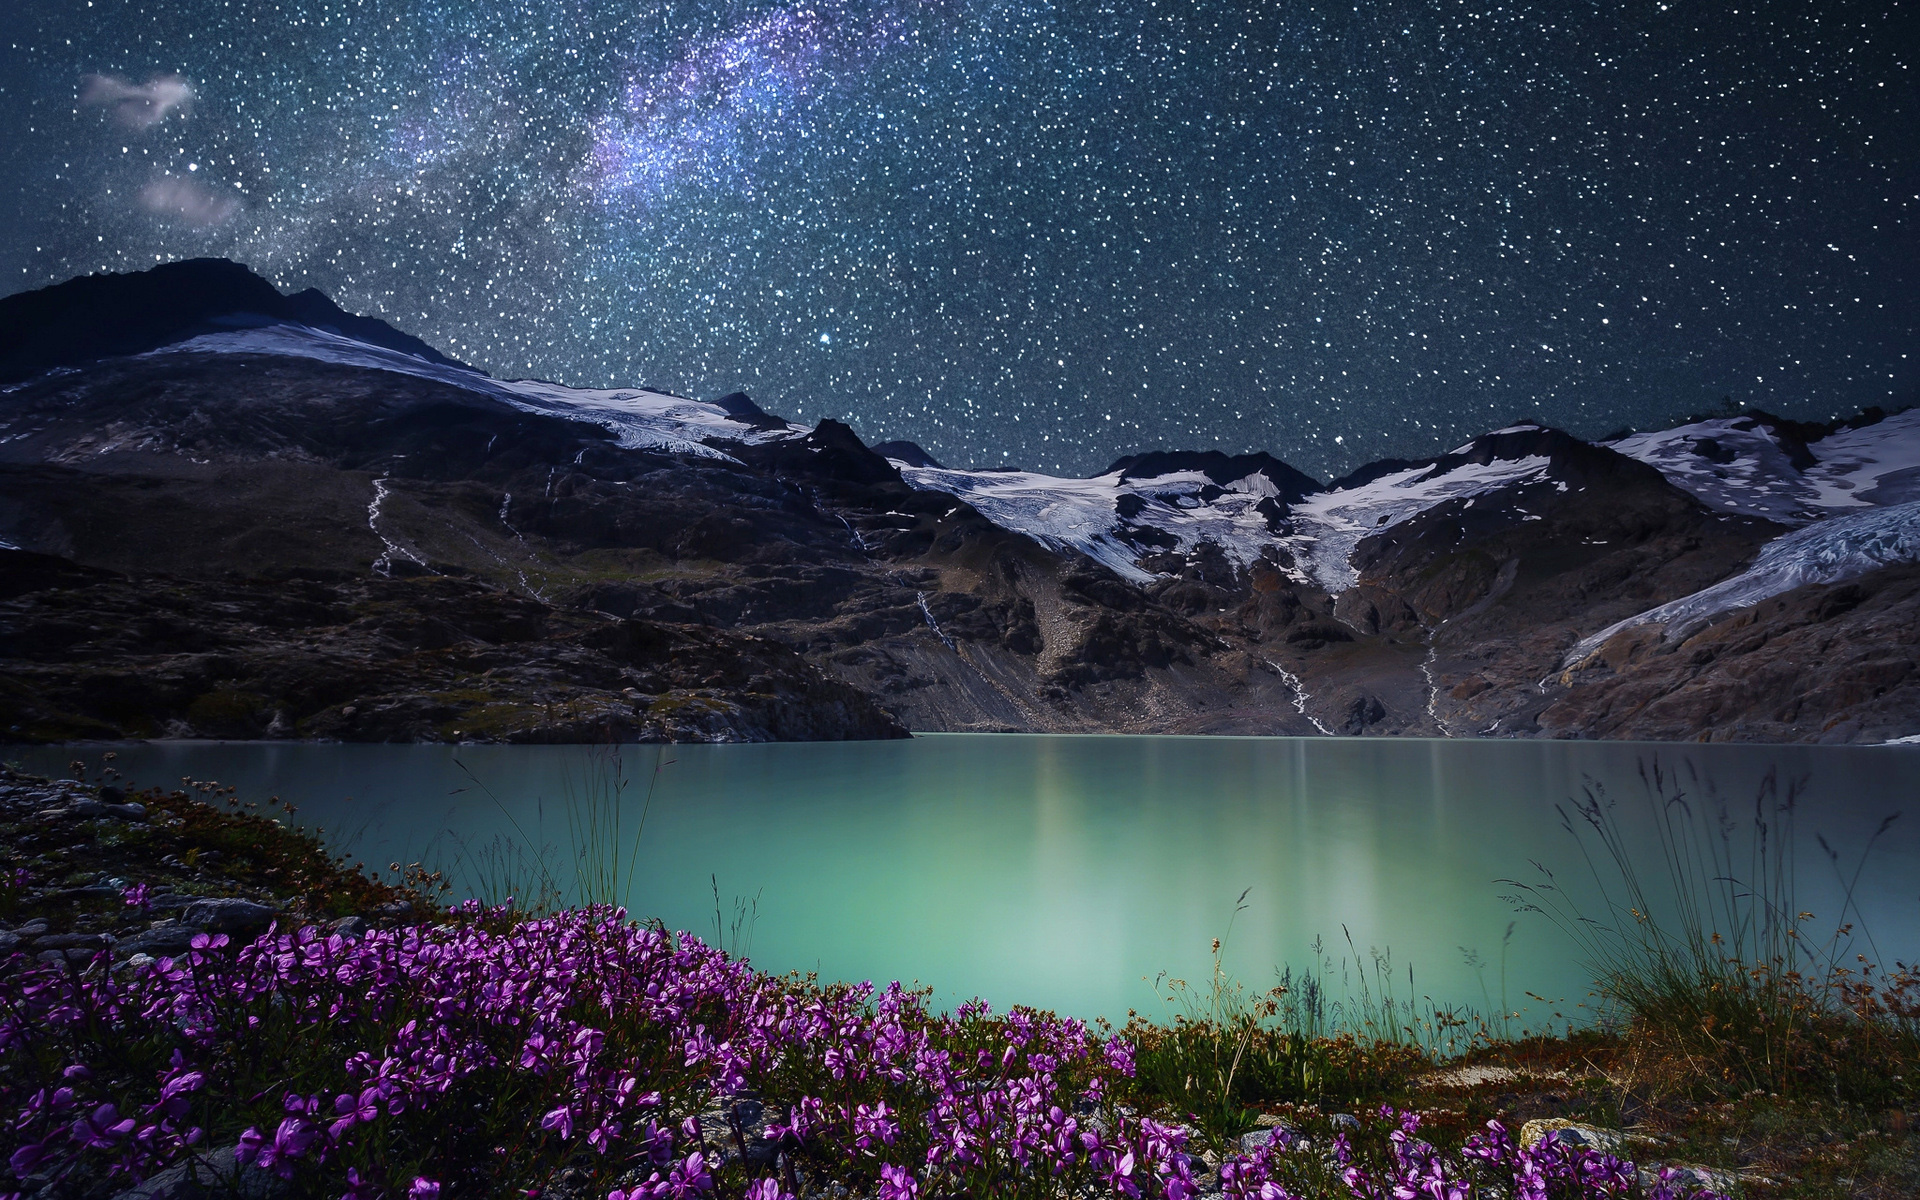 Mountain Alps During Night Photography Wallpapers